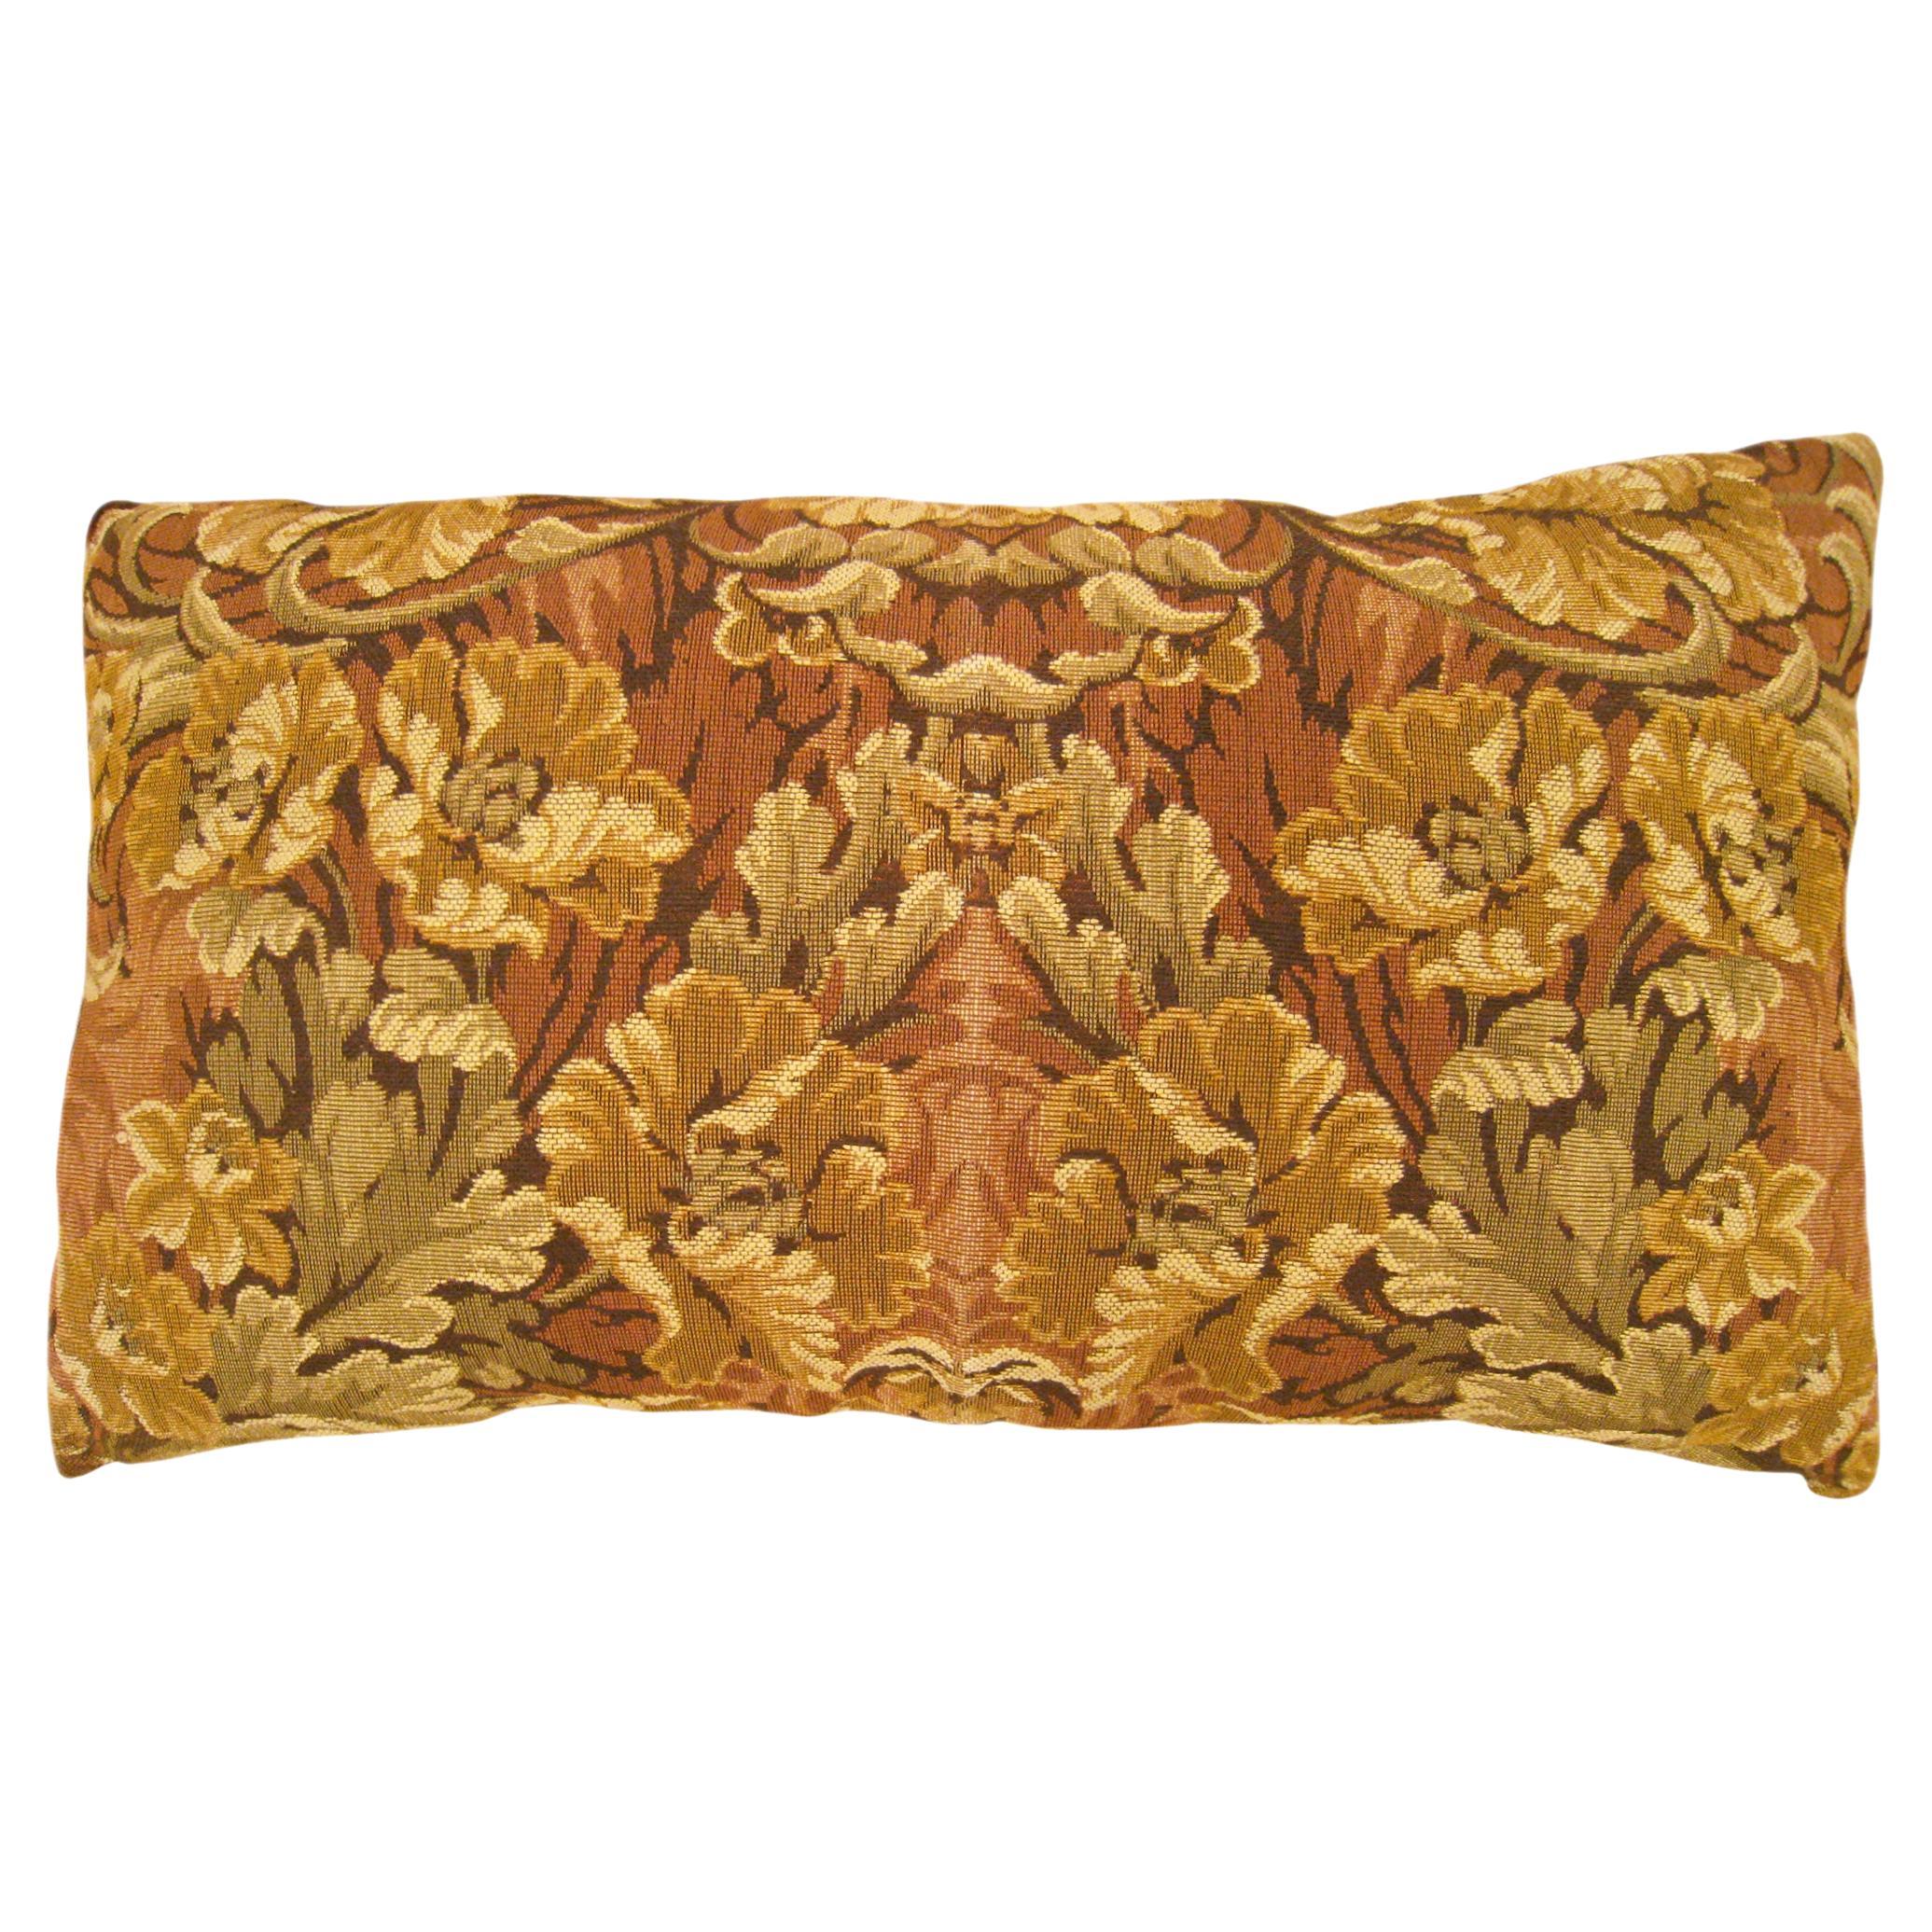 Decorative Antique Jacquard Tapestry Pillow with Floral Elements  For Sale